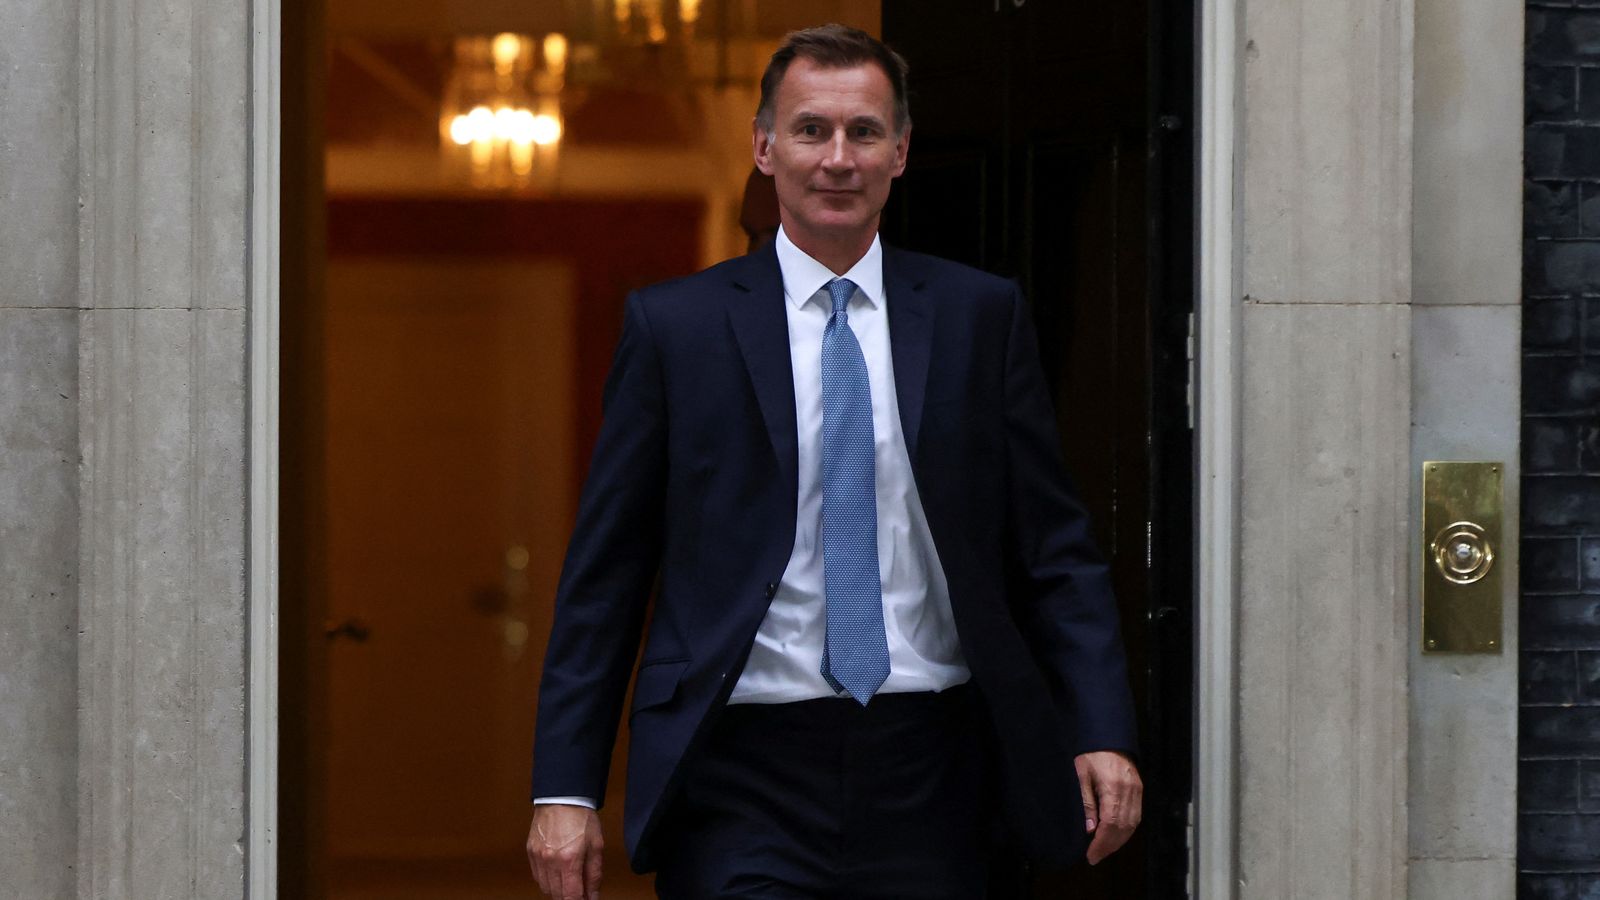 Hunt warns this week’s budget is ‘no time for rabbits’ as he prepares for tough cuts to plug £55bn black hole | Politics News